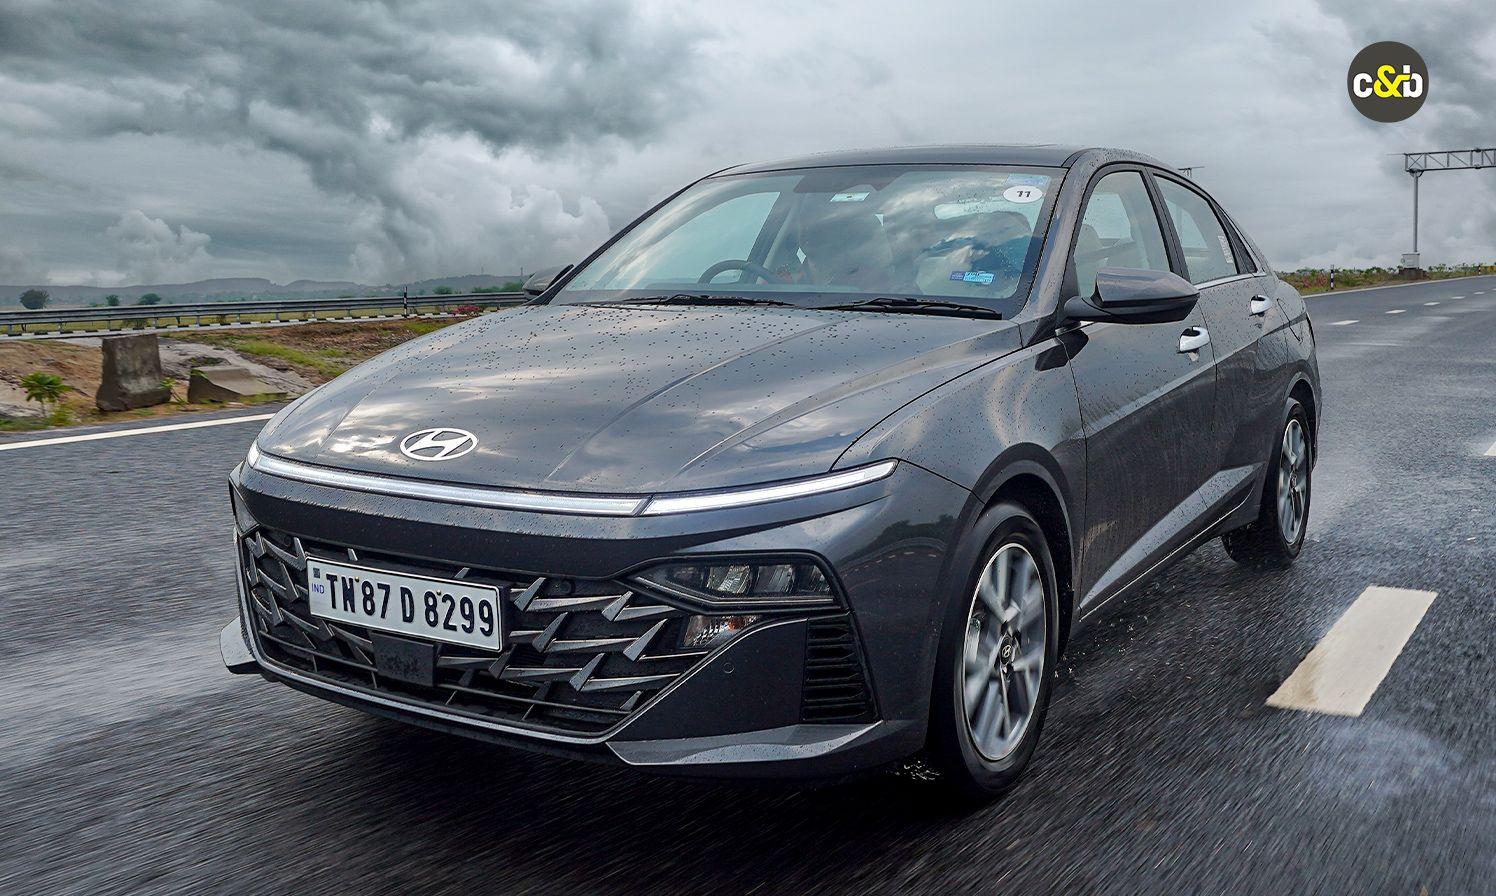 Korean car brand Hyundai has launched the 6th-generation model of the Hyundai Verna in India. The new Verna comes with a lot of changes, including a new turbo engine. We drive the 2023 Hyundai Verna to get a sense of what has changed.
